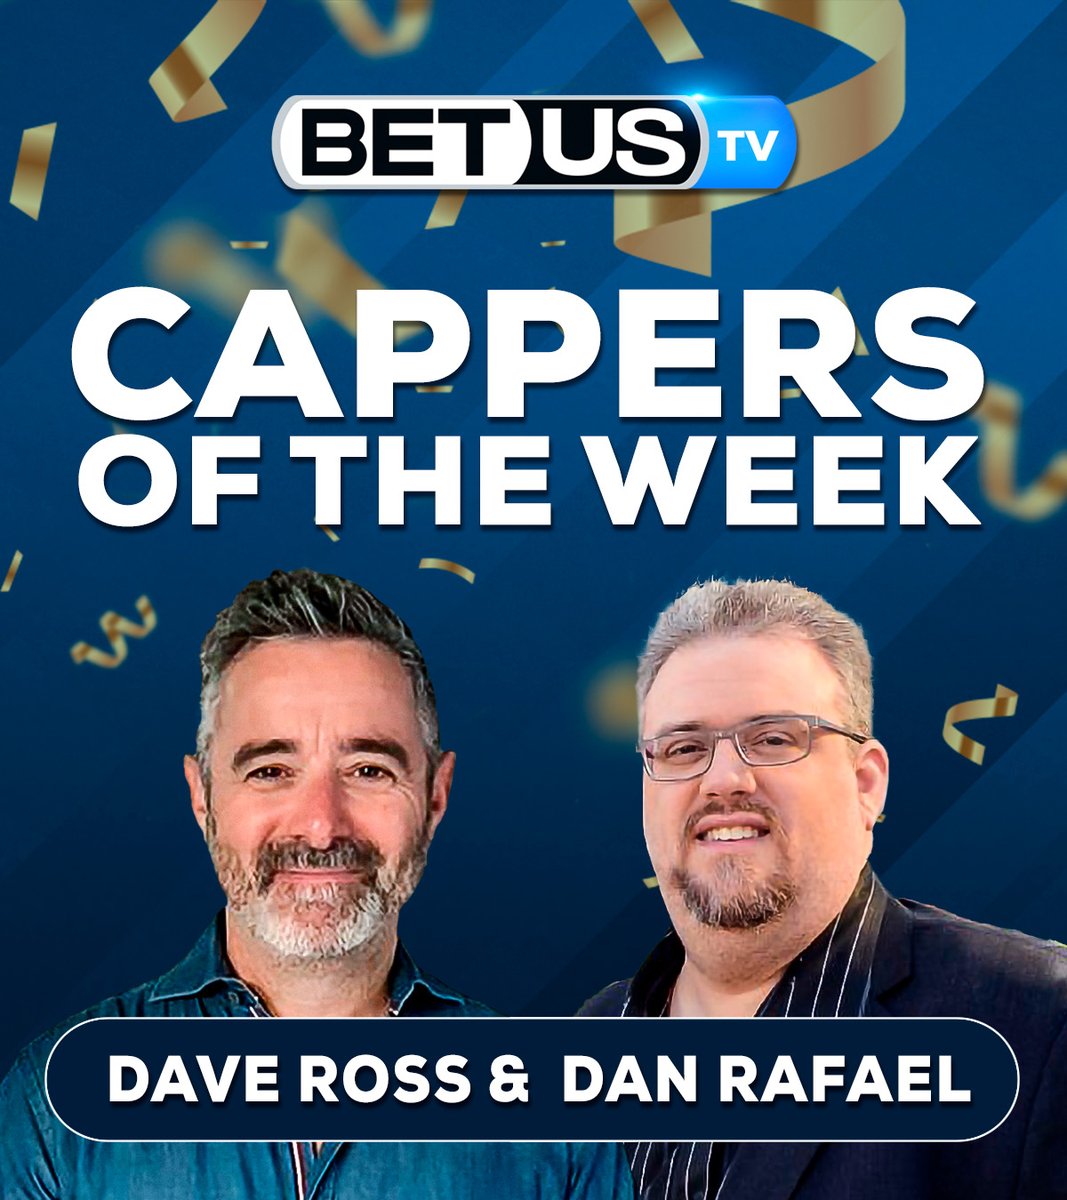 These combat sports experts were ON FIRE on our shows last week! 🥊🥋 @drosssports 4-0 on our UFC Show 💰️ @DanRafael1 4-0 on our Boxing Show 🤑 They are the BetUS Cappers of the week 🥇🥇 Catch all our cappers on BetUS TV➡️bit.ly/BetUS-TV #FreePicks #GamblingX